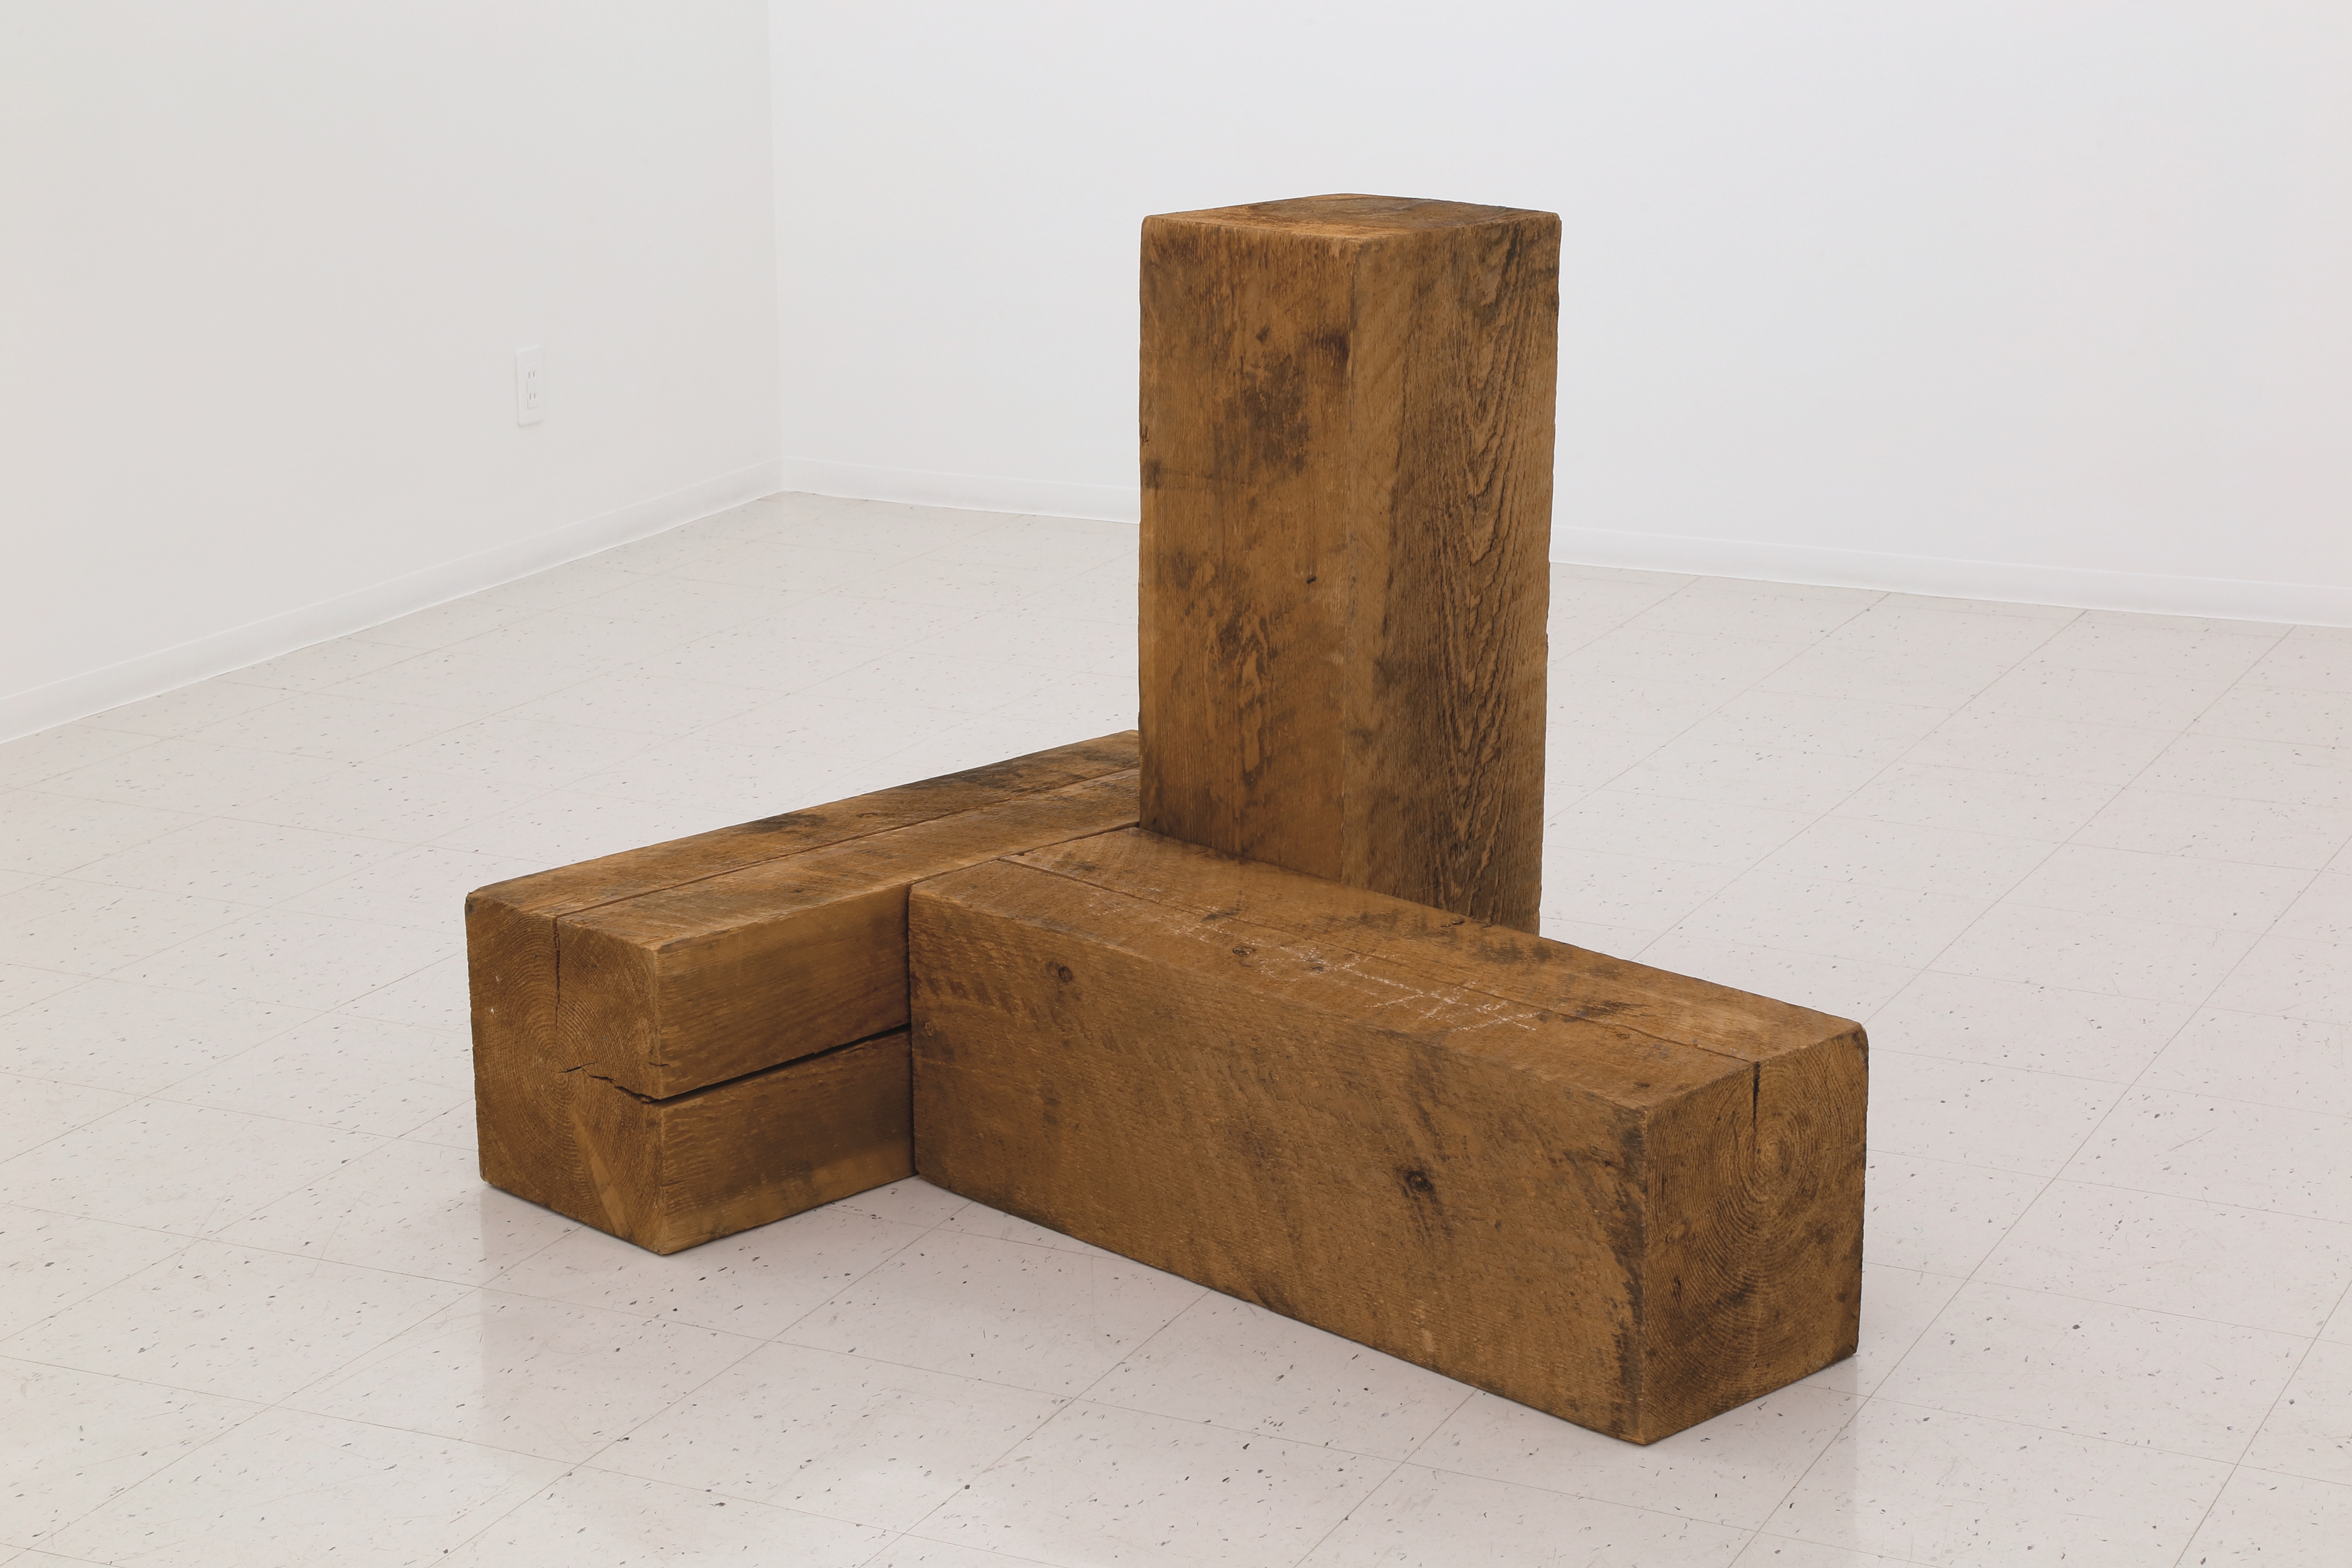 The Way East and South by Carl Andre, Executed in 1975